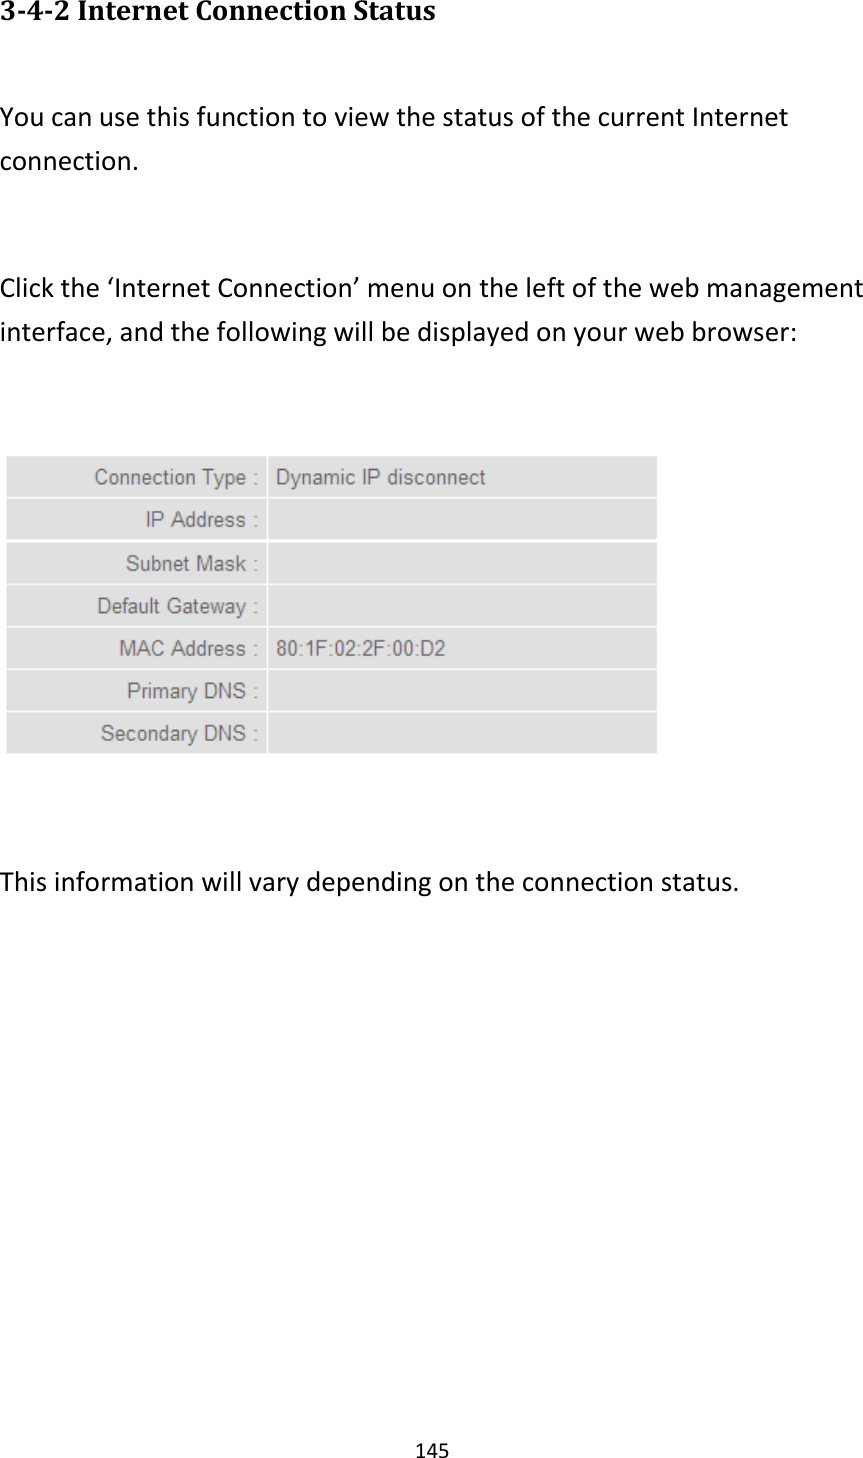 145 3-4-2 Internet Connection Status  You can use this function to view the status of the current Internet connection.  Click the ‘Internet Connection’ menu on the left of the web management interface, and the following will be displayed on your web browser:    This information will vary depending on the connection status.   